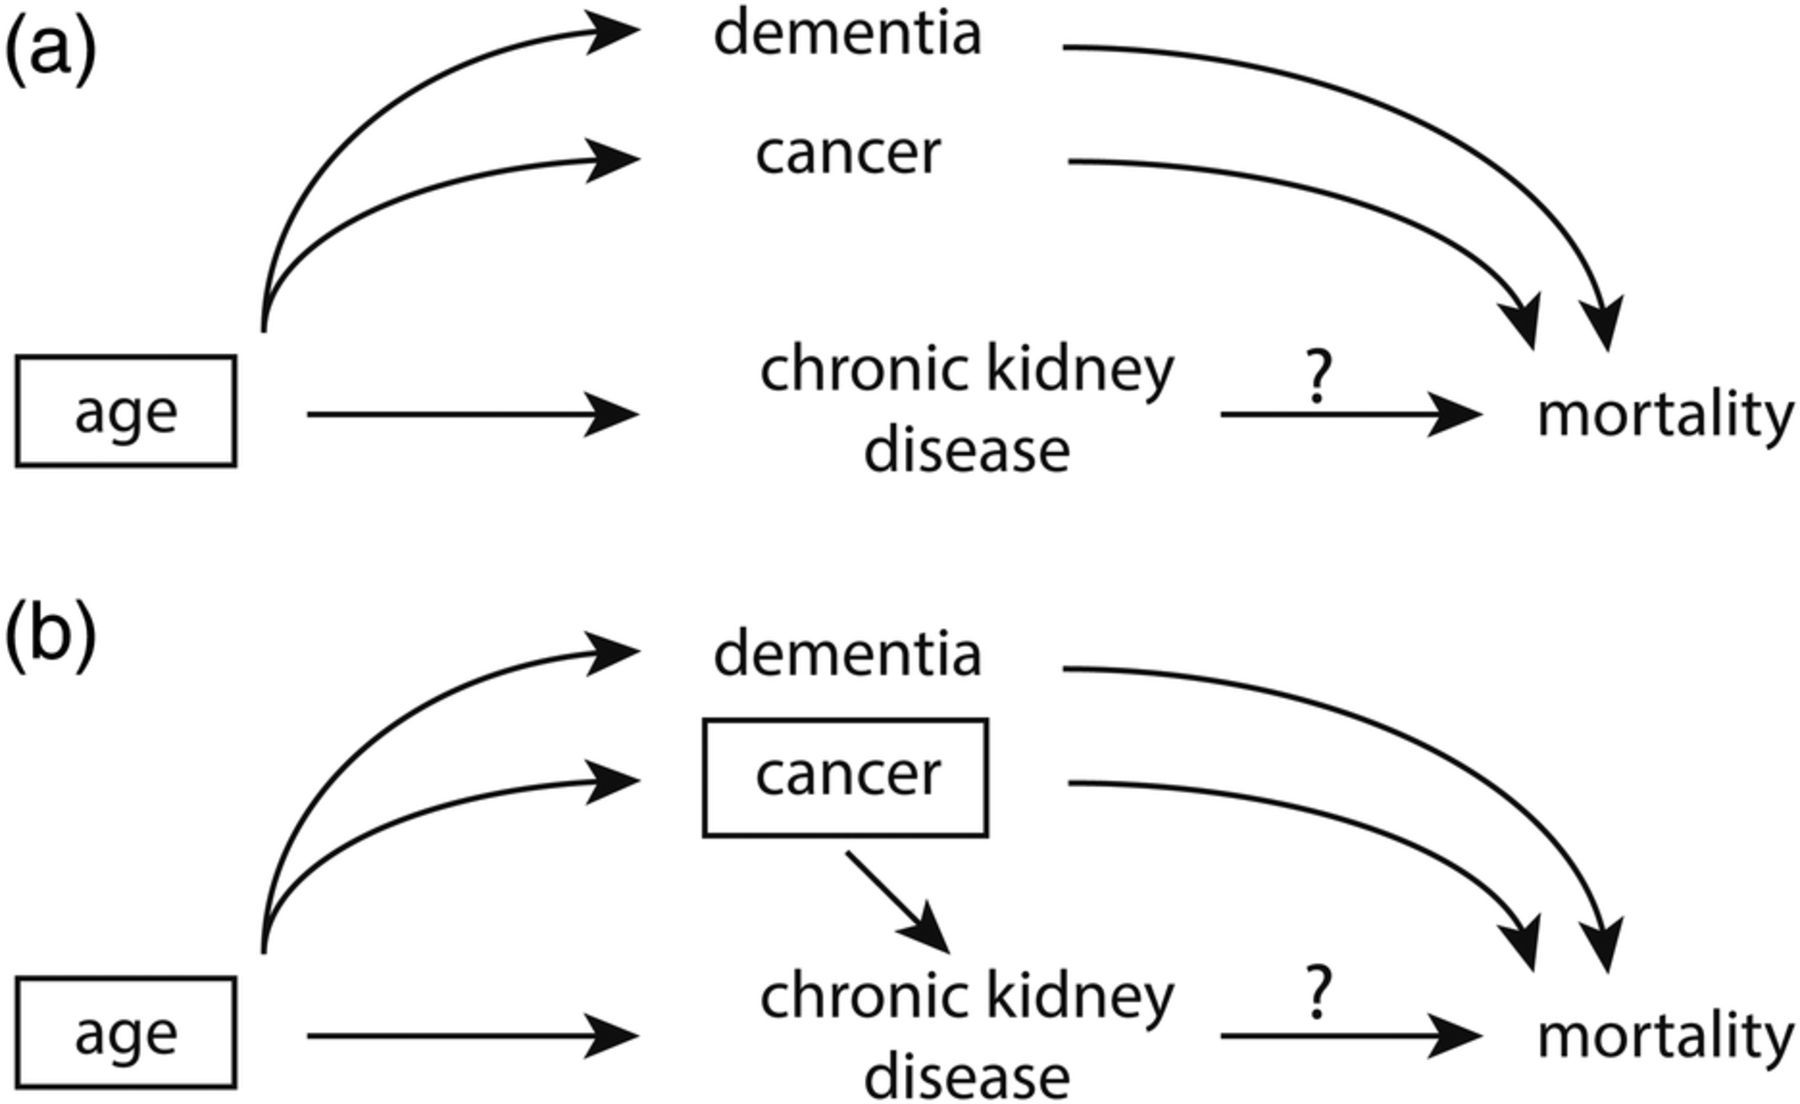 Graphical presentation of confounding in directed acyclic graphs. Identification of a minimal set of factors to resolve confounding. In (a), the backdoor path from chronic kidney disease (CKD) to mortality can be blocked by just conditioning on age, as depicted by the box around age. However if we assume that cancer also causes CKD (b), the backdoor paths can only be closed by conditioning on two factors, either age and cancer (as depicted) or cancer and dementia. Source: @suttorp:2015.